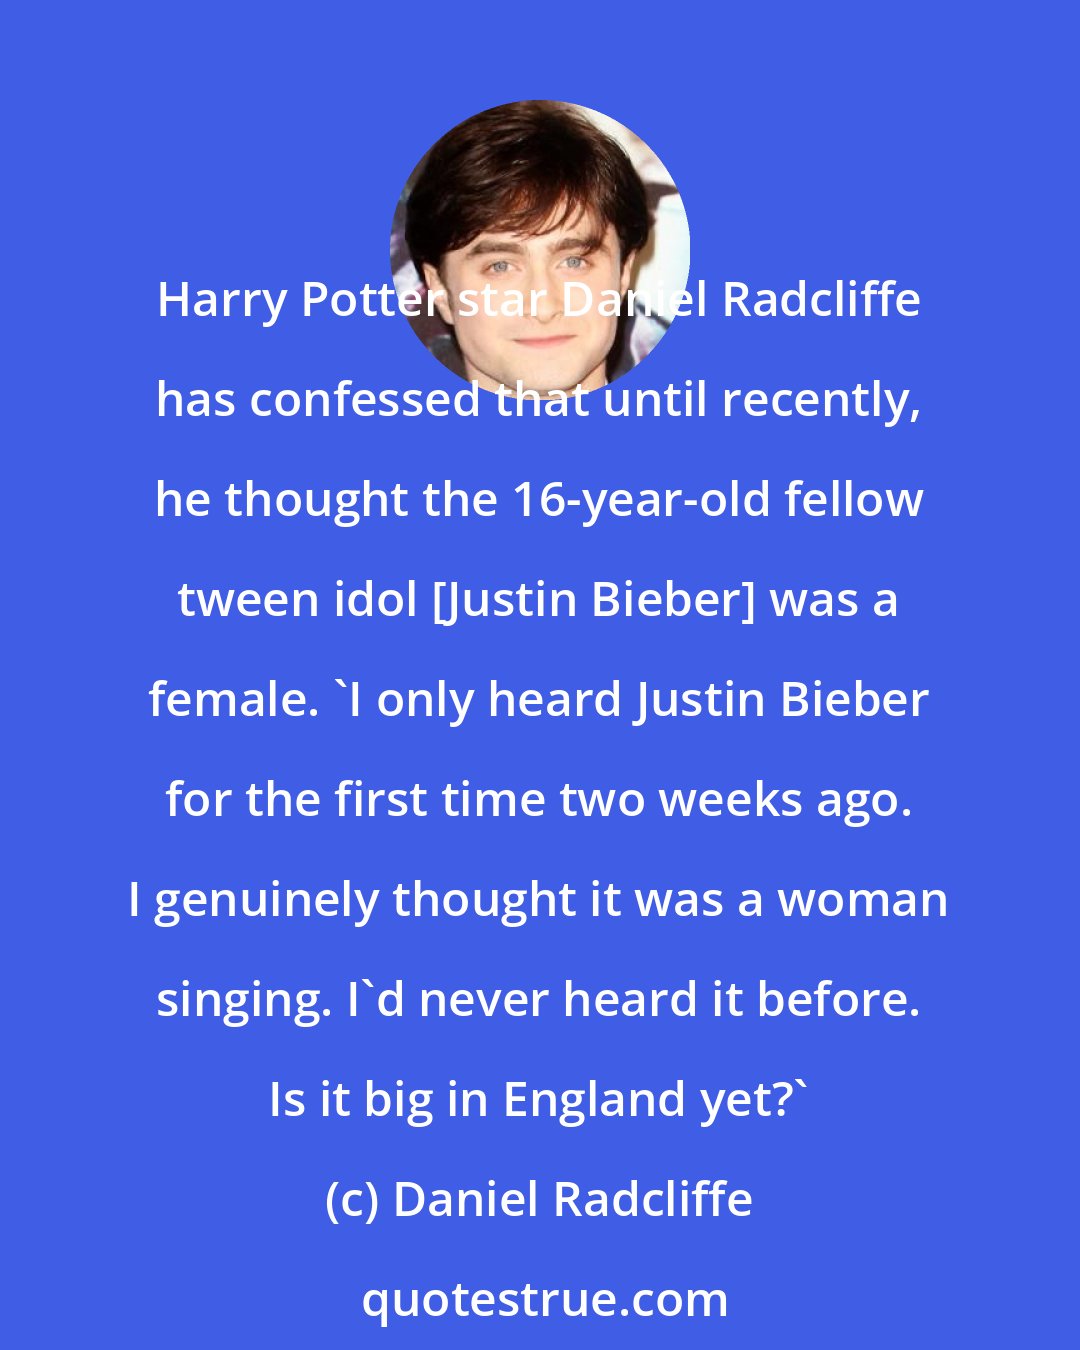 Daniel Radcliffe: Harry Potter star Daniel Radcliffe has confessed that until recently, he thought the 16-year-old fellow tween idol [Justin Bieber] was a female. 'I only heard Justin Bieber for the first time two weeks ago. I genuinely thought it was a woman singing. I'd never heard it before. Is it big in England yet?'